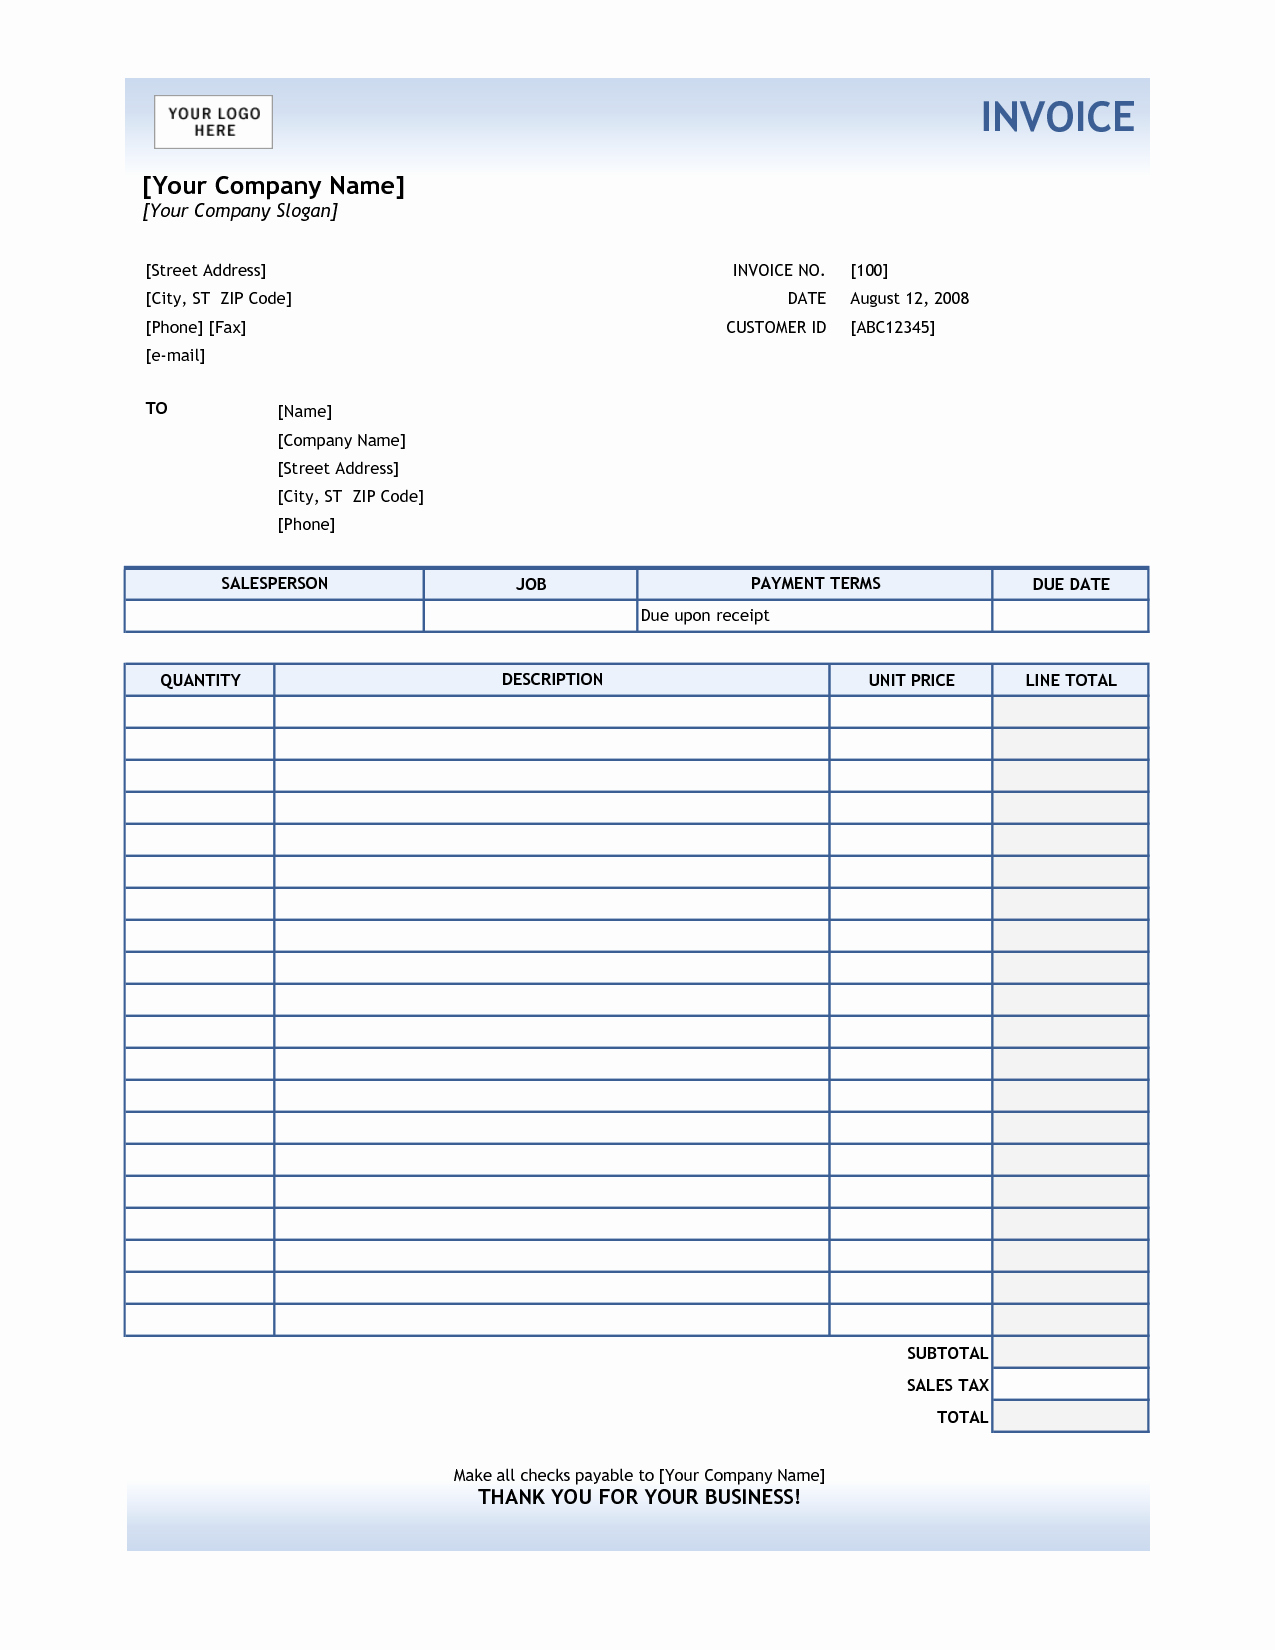 Free Service Invoice Template Download Inspirational Service Invoice Template Excel